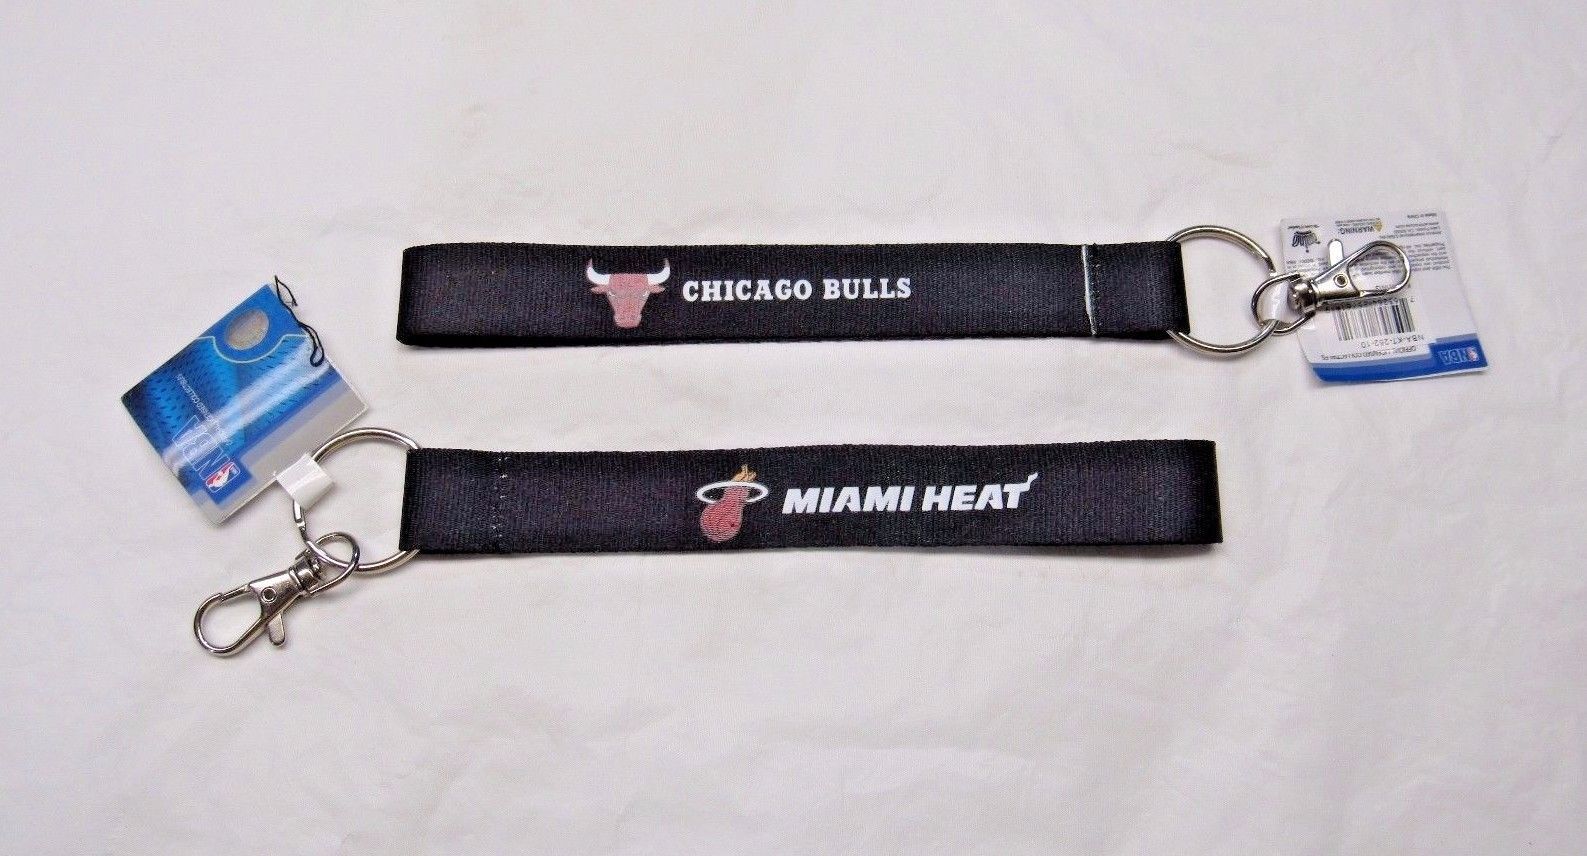 NBA Wristlet Key Chains 8.5" Long .75" Wide Made by Aminco Select Team Below - $7.95